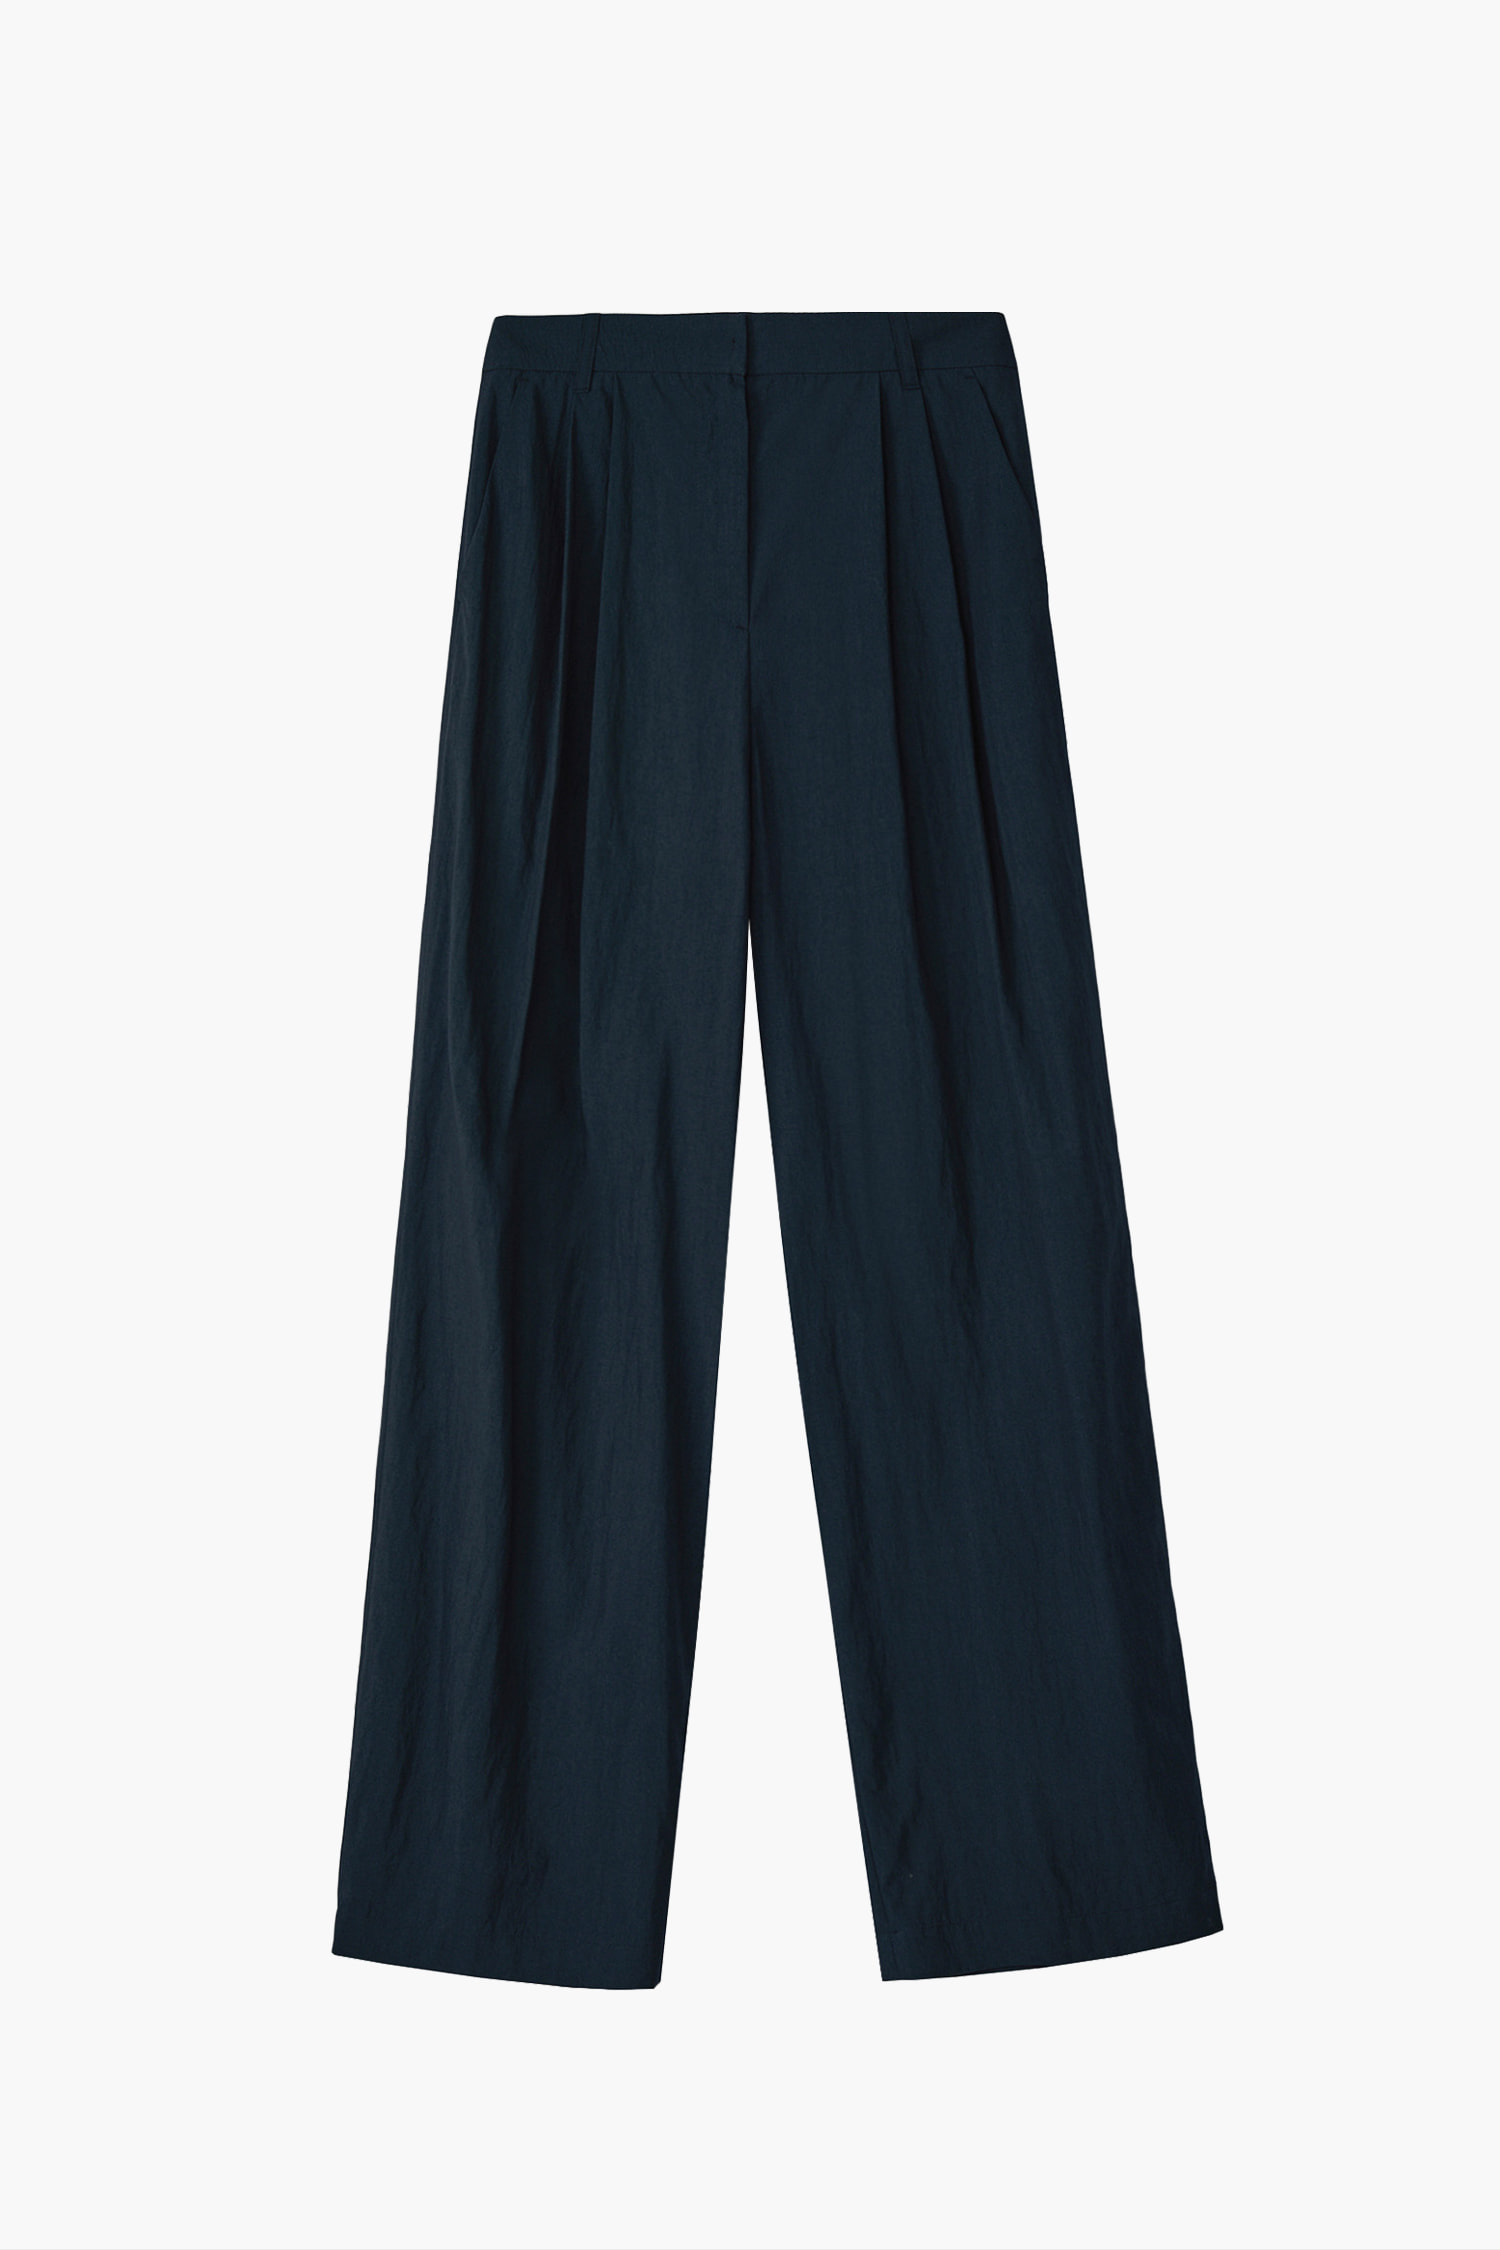 WIDE TWO TUCK PANTS - NAVY